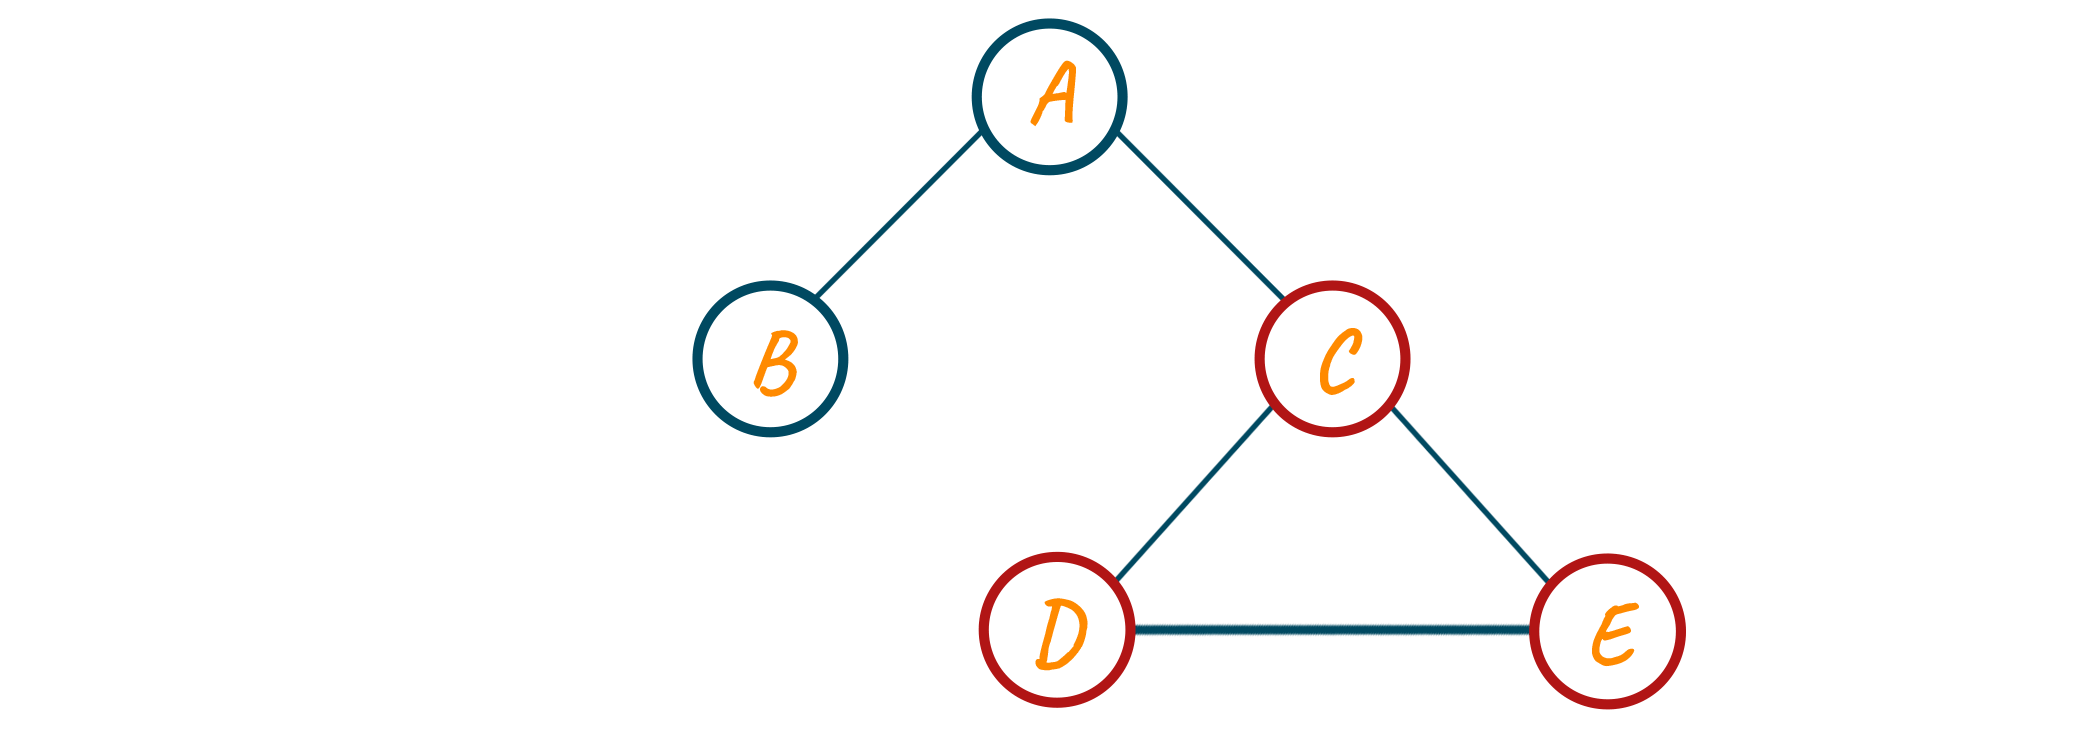 Detected cycle in graph is C-D-E-C